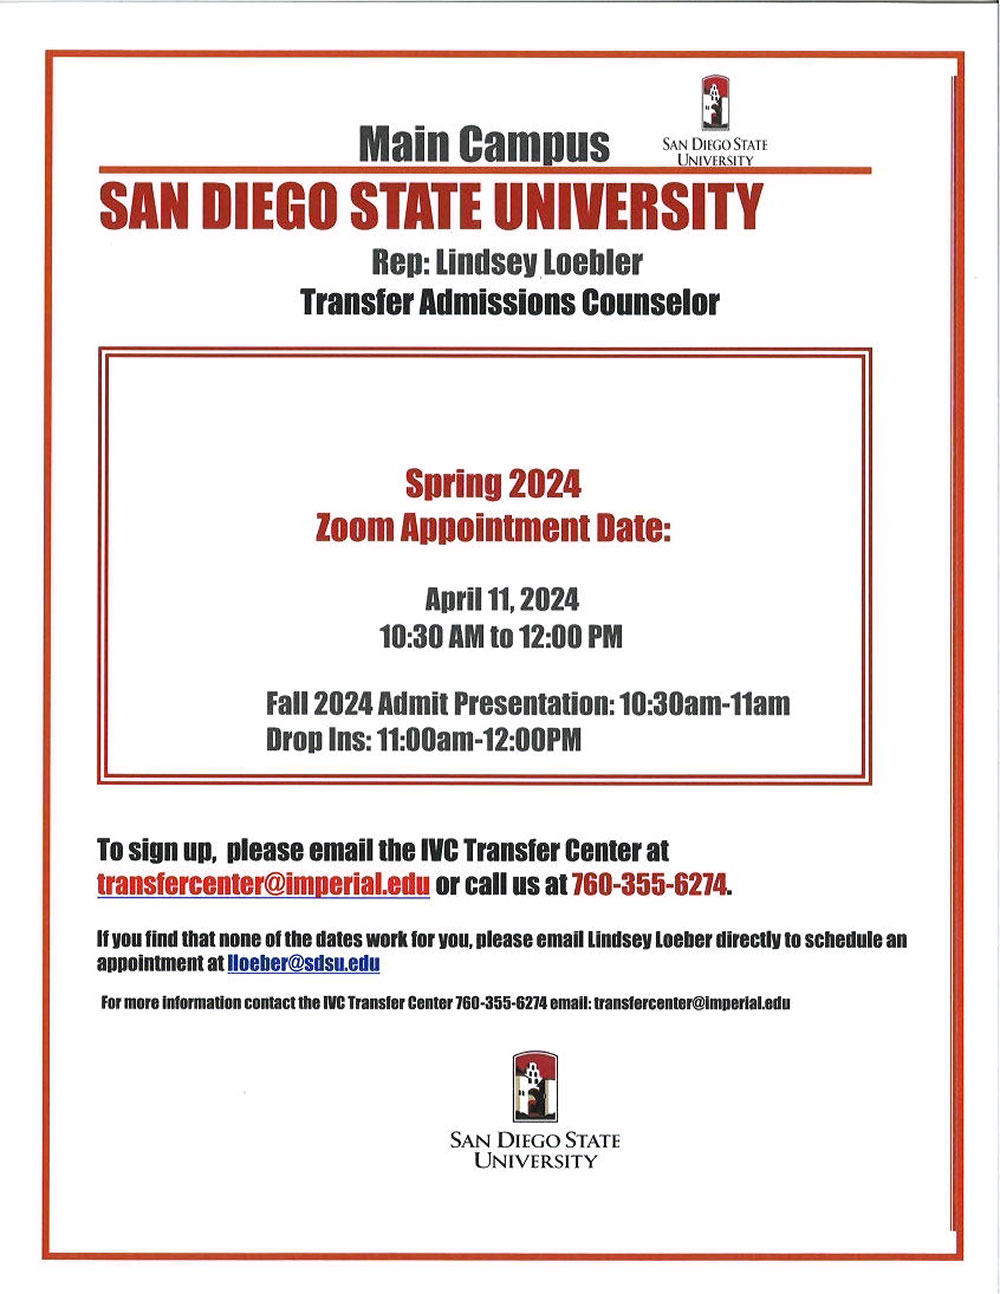 SDSU Transfer Admissions Counselor